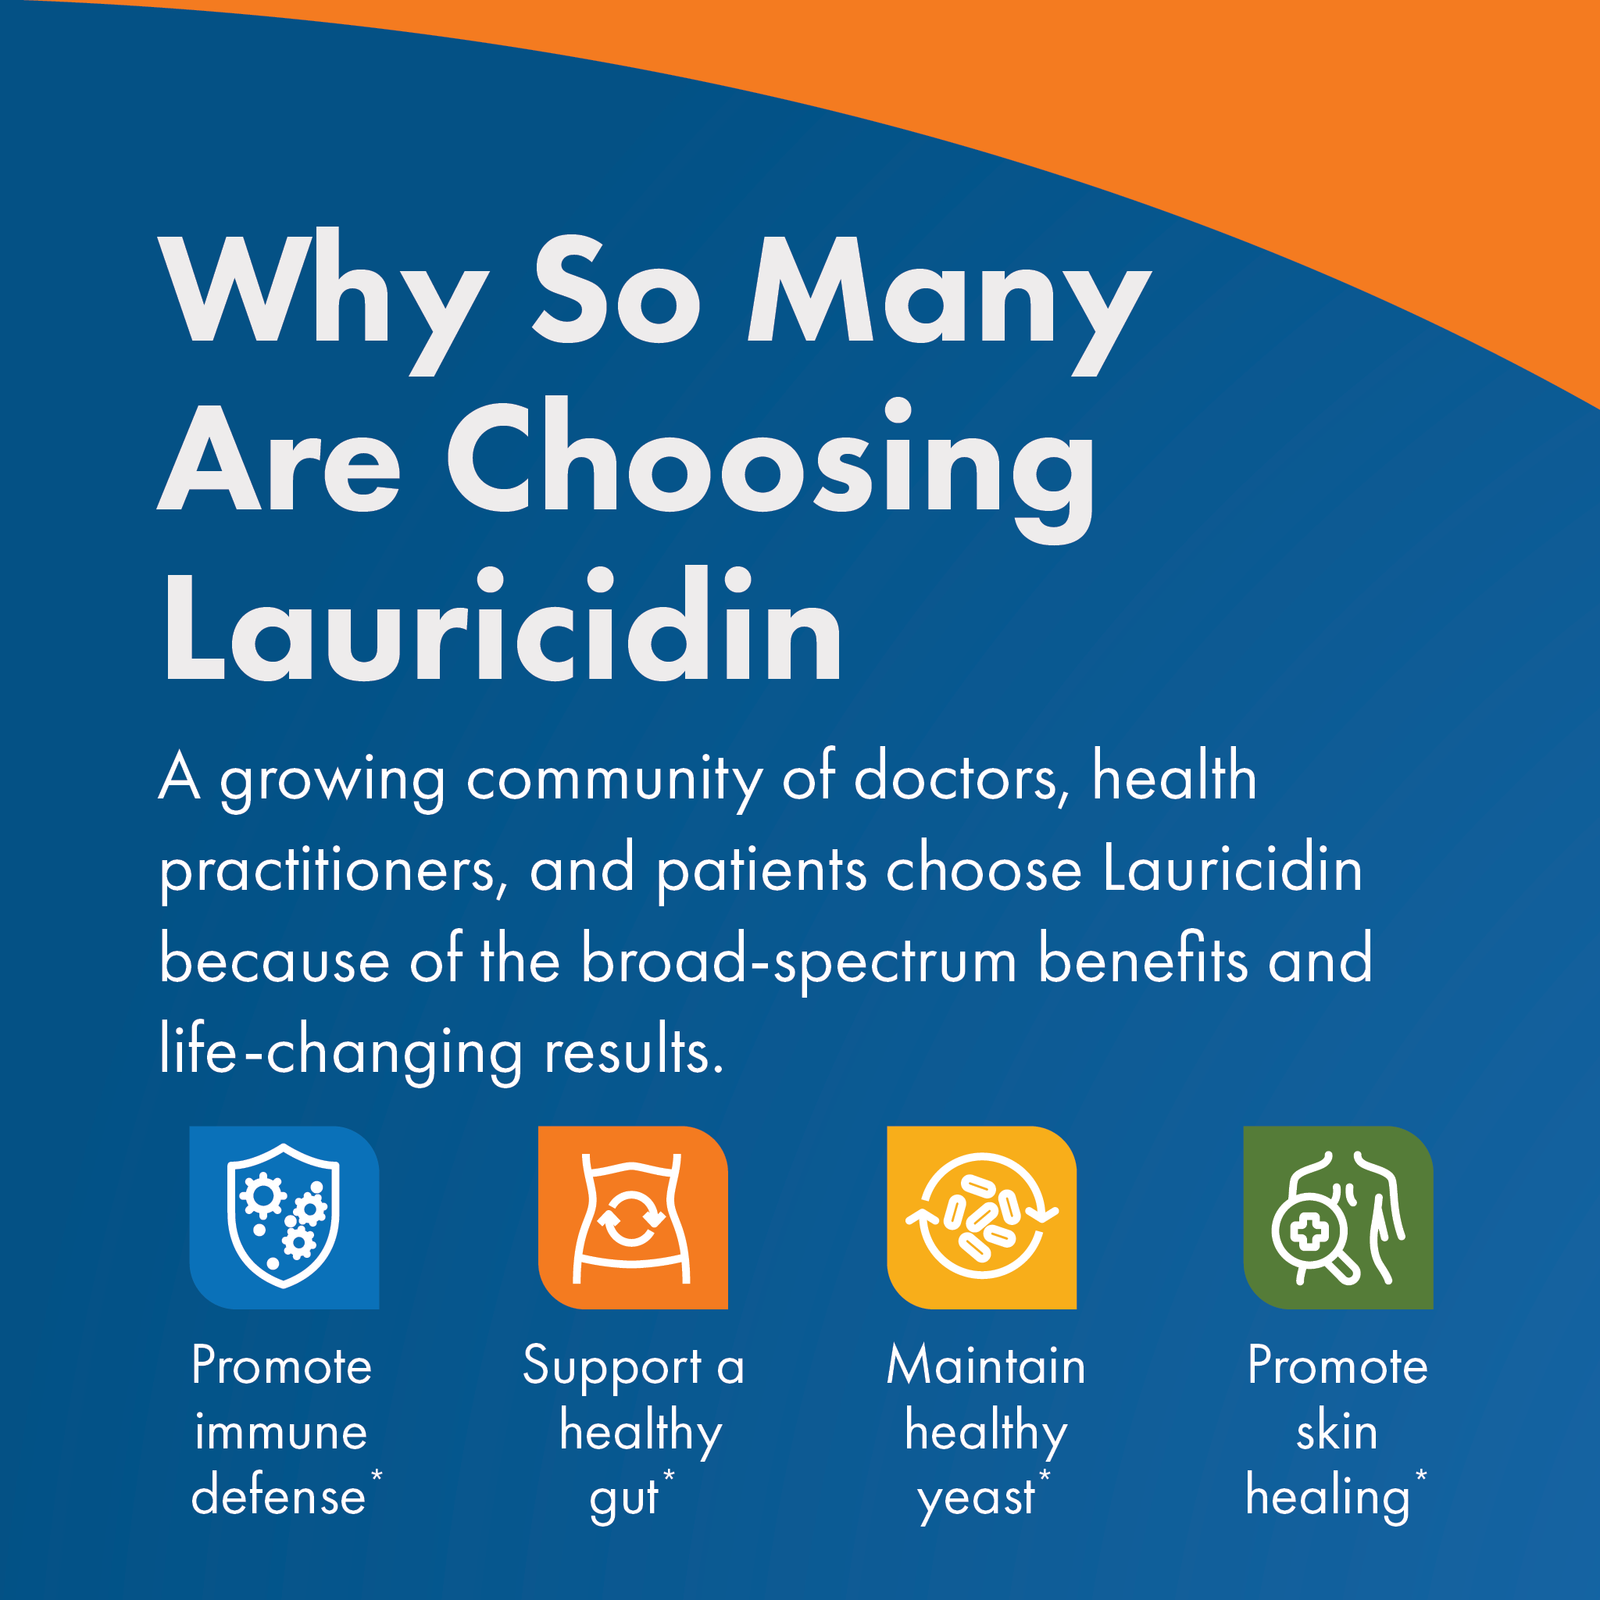 A Growing Community of Doctors, Health Practitioners and patients choose Lauricidin because of the broad spectrum benefits and life-changing results.